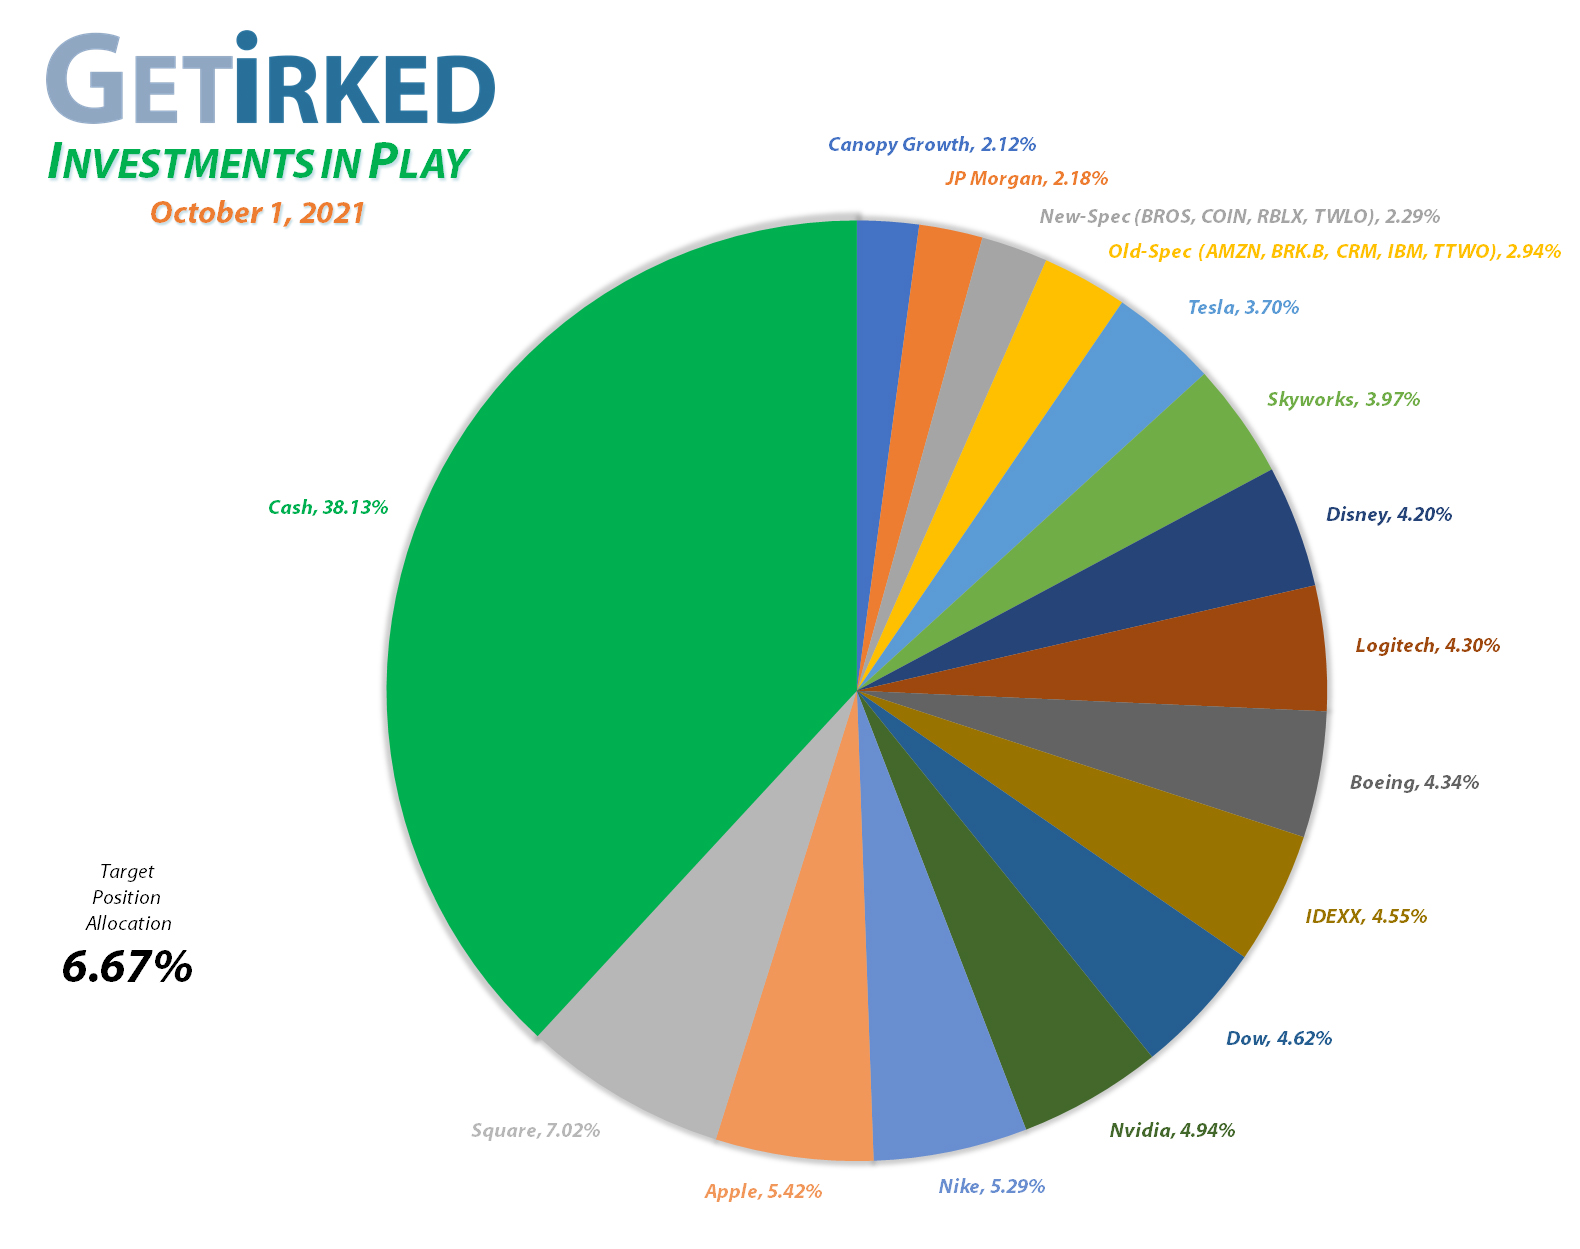 Get Irked - Investments in Play - Current Holdings - March 12, 2021et Irked's Pandemic Portfolio Holdings as of October 1, 2021